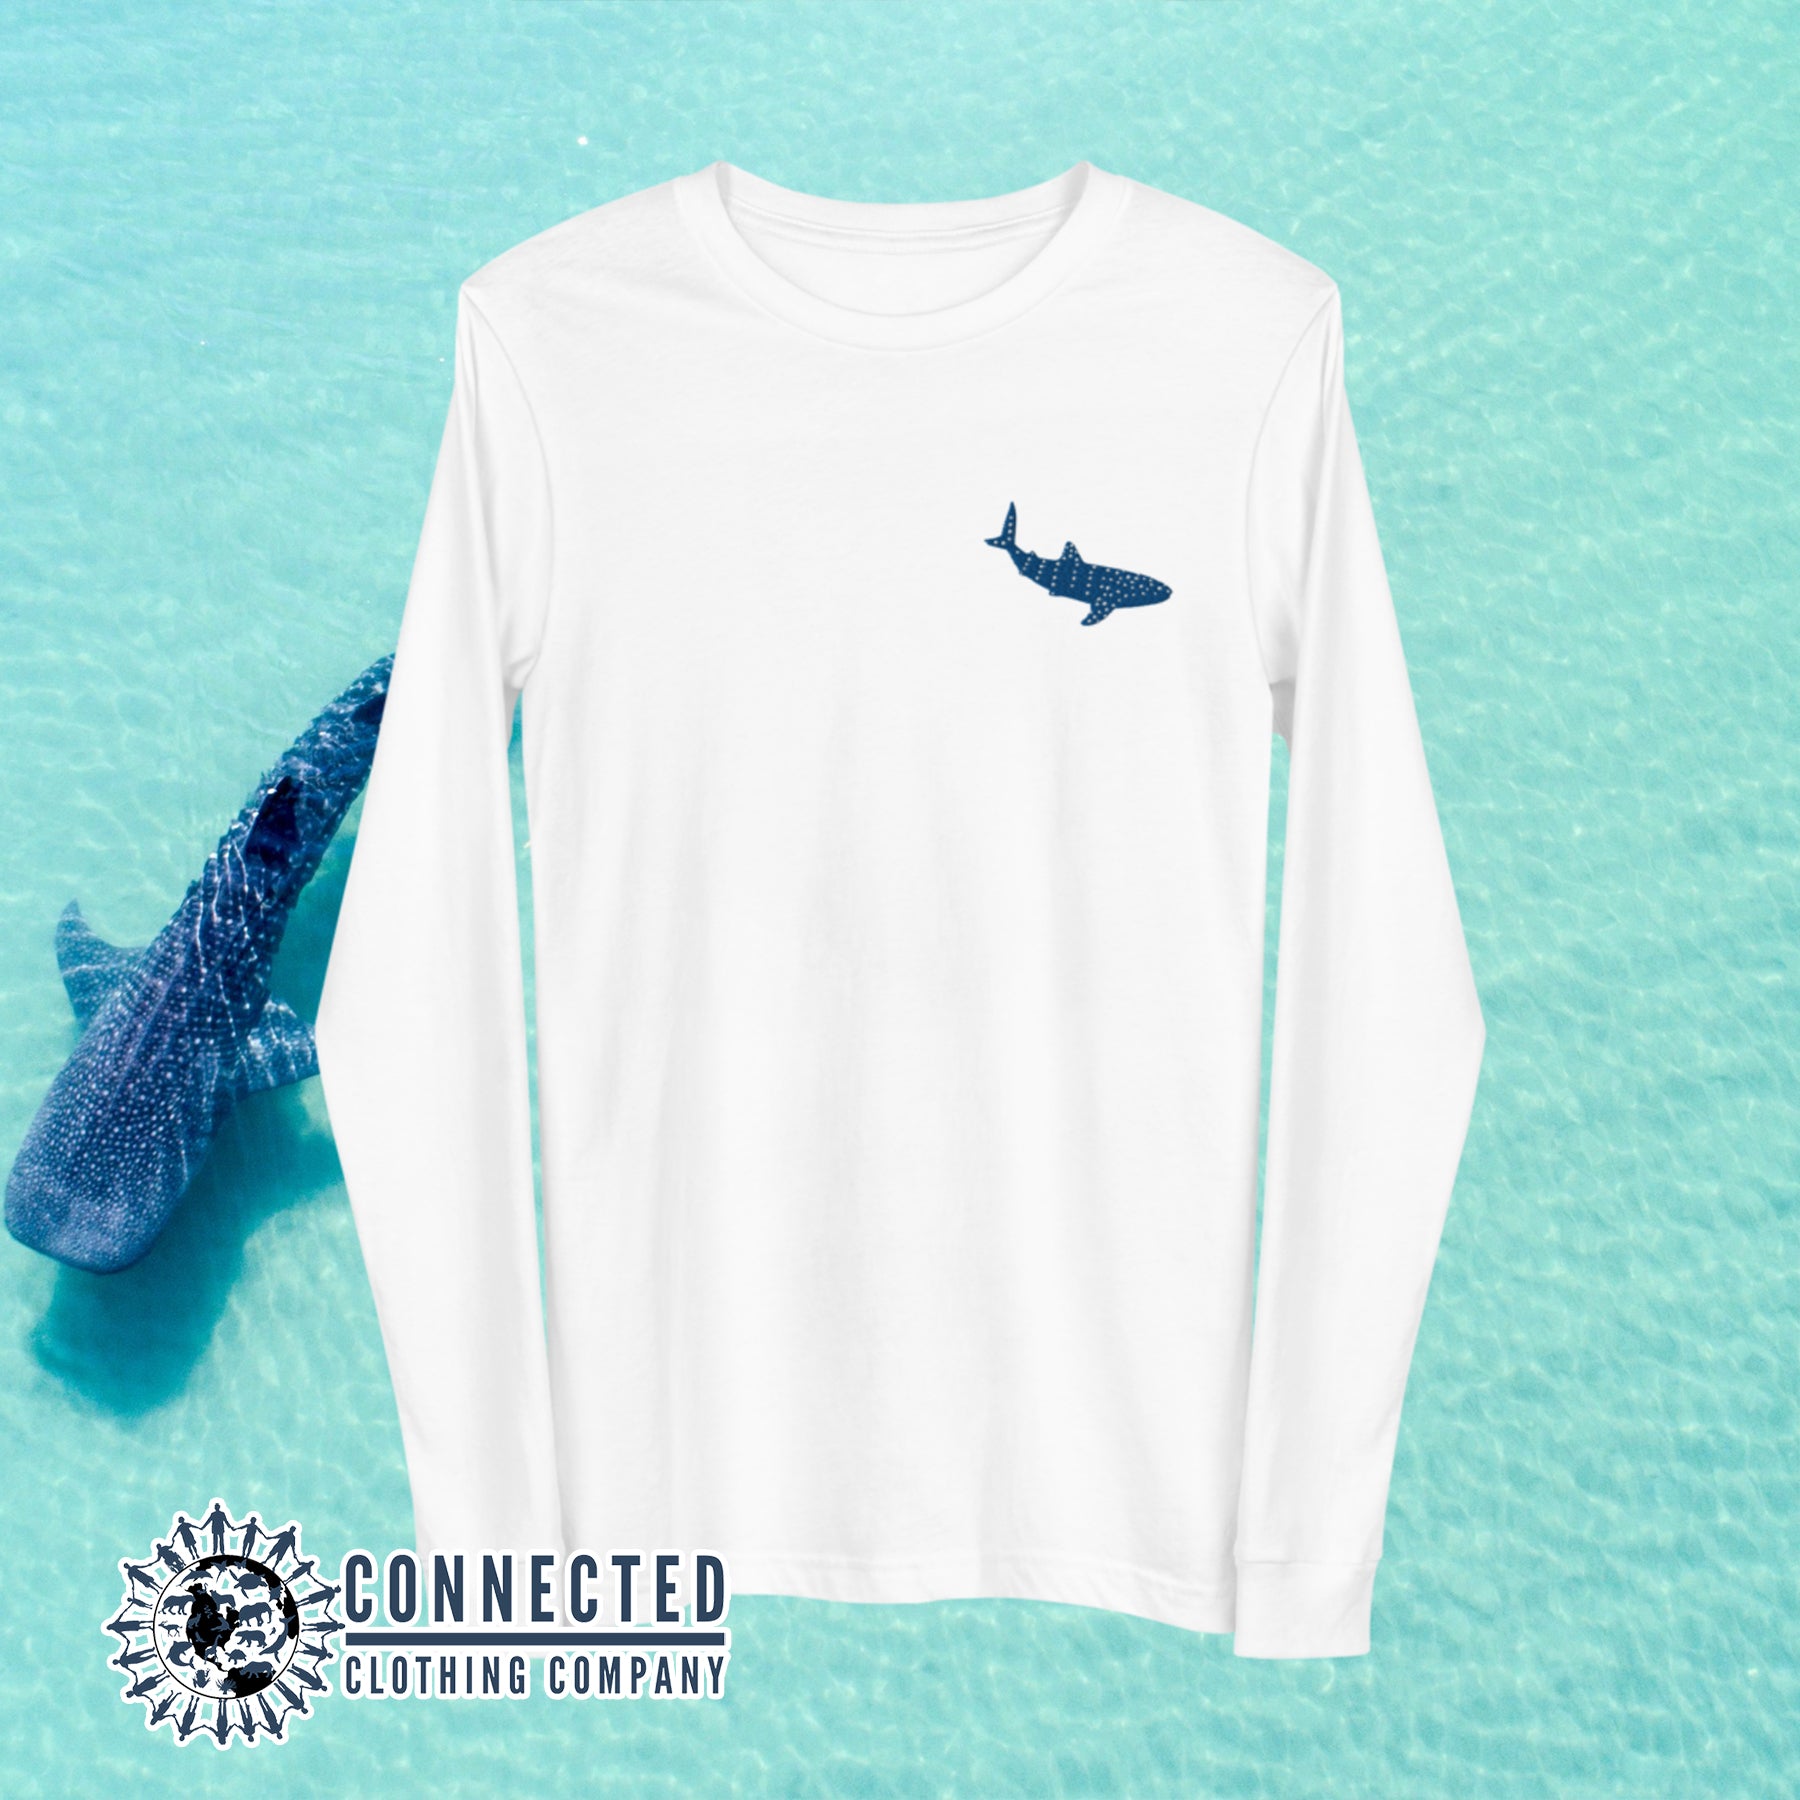 White Embroidered Whale Shark Long-Sleeve Shirt - sweetsherriloudesigns - Ethically and Sustainably Made - 10% of profits donated to shark conservation and ocean conservation